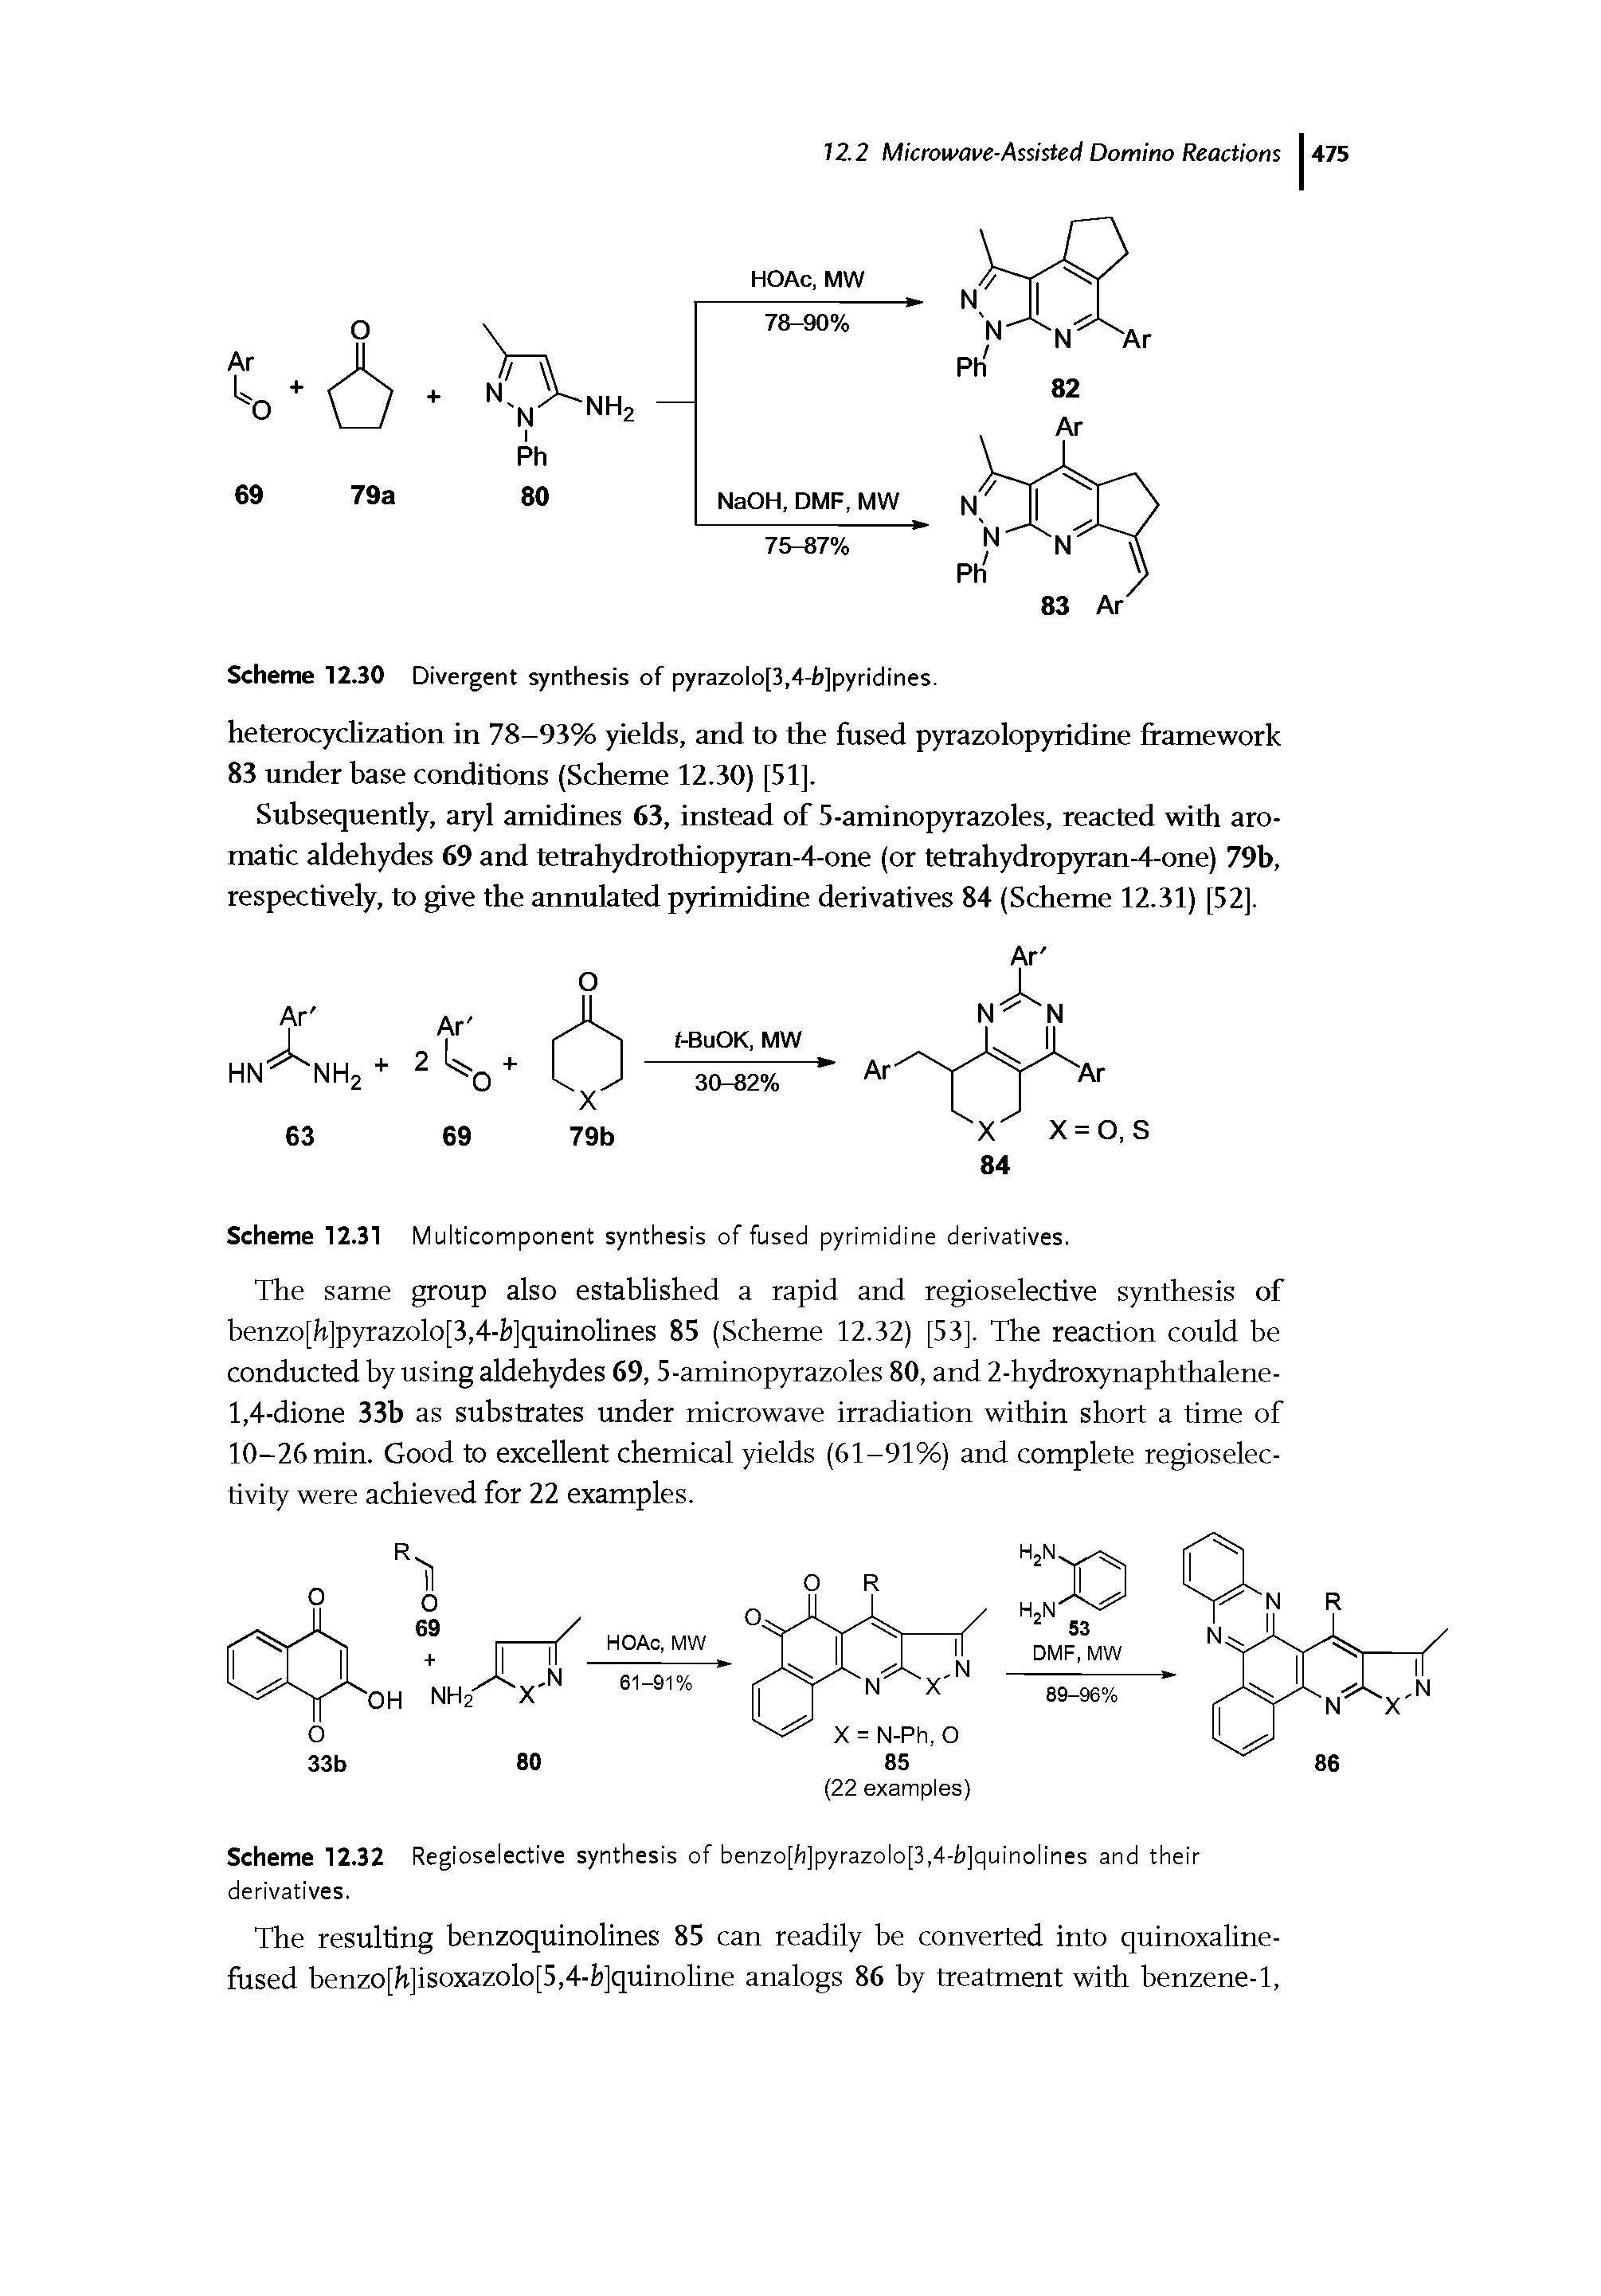 Scheme 1232 Regioselective synthesis of benzo[h]pyrazolo[3,4-fc]quinolines and their derivatives.